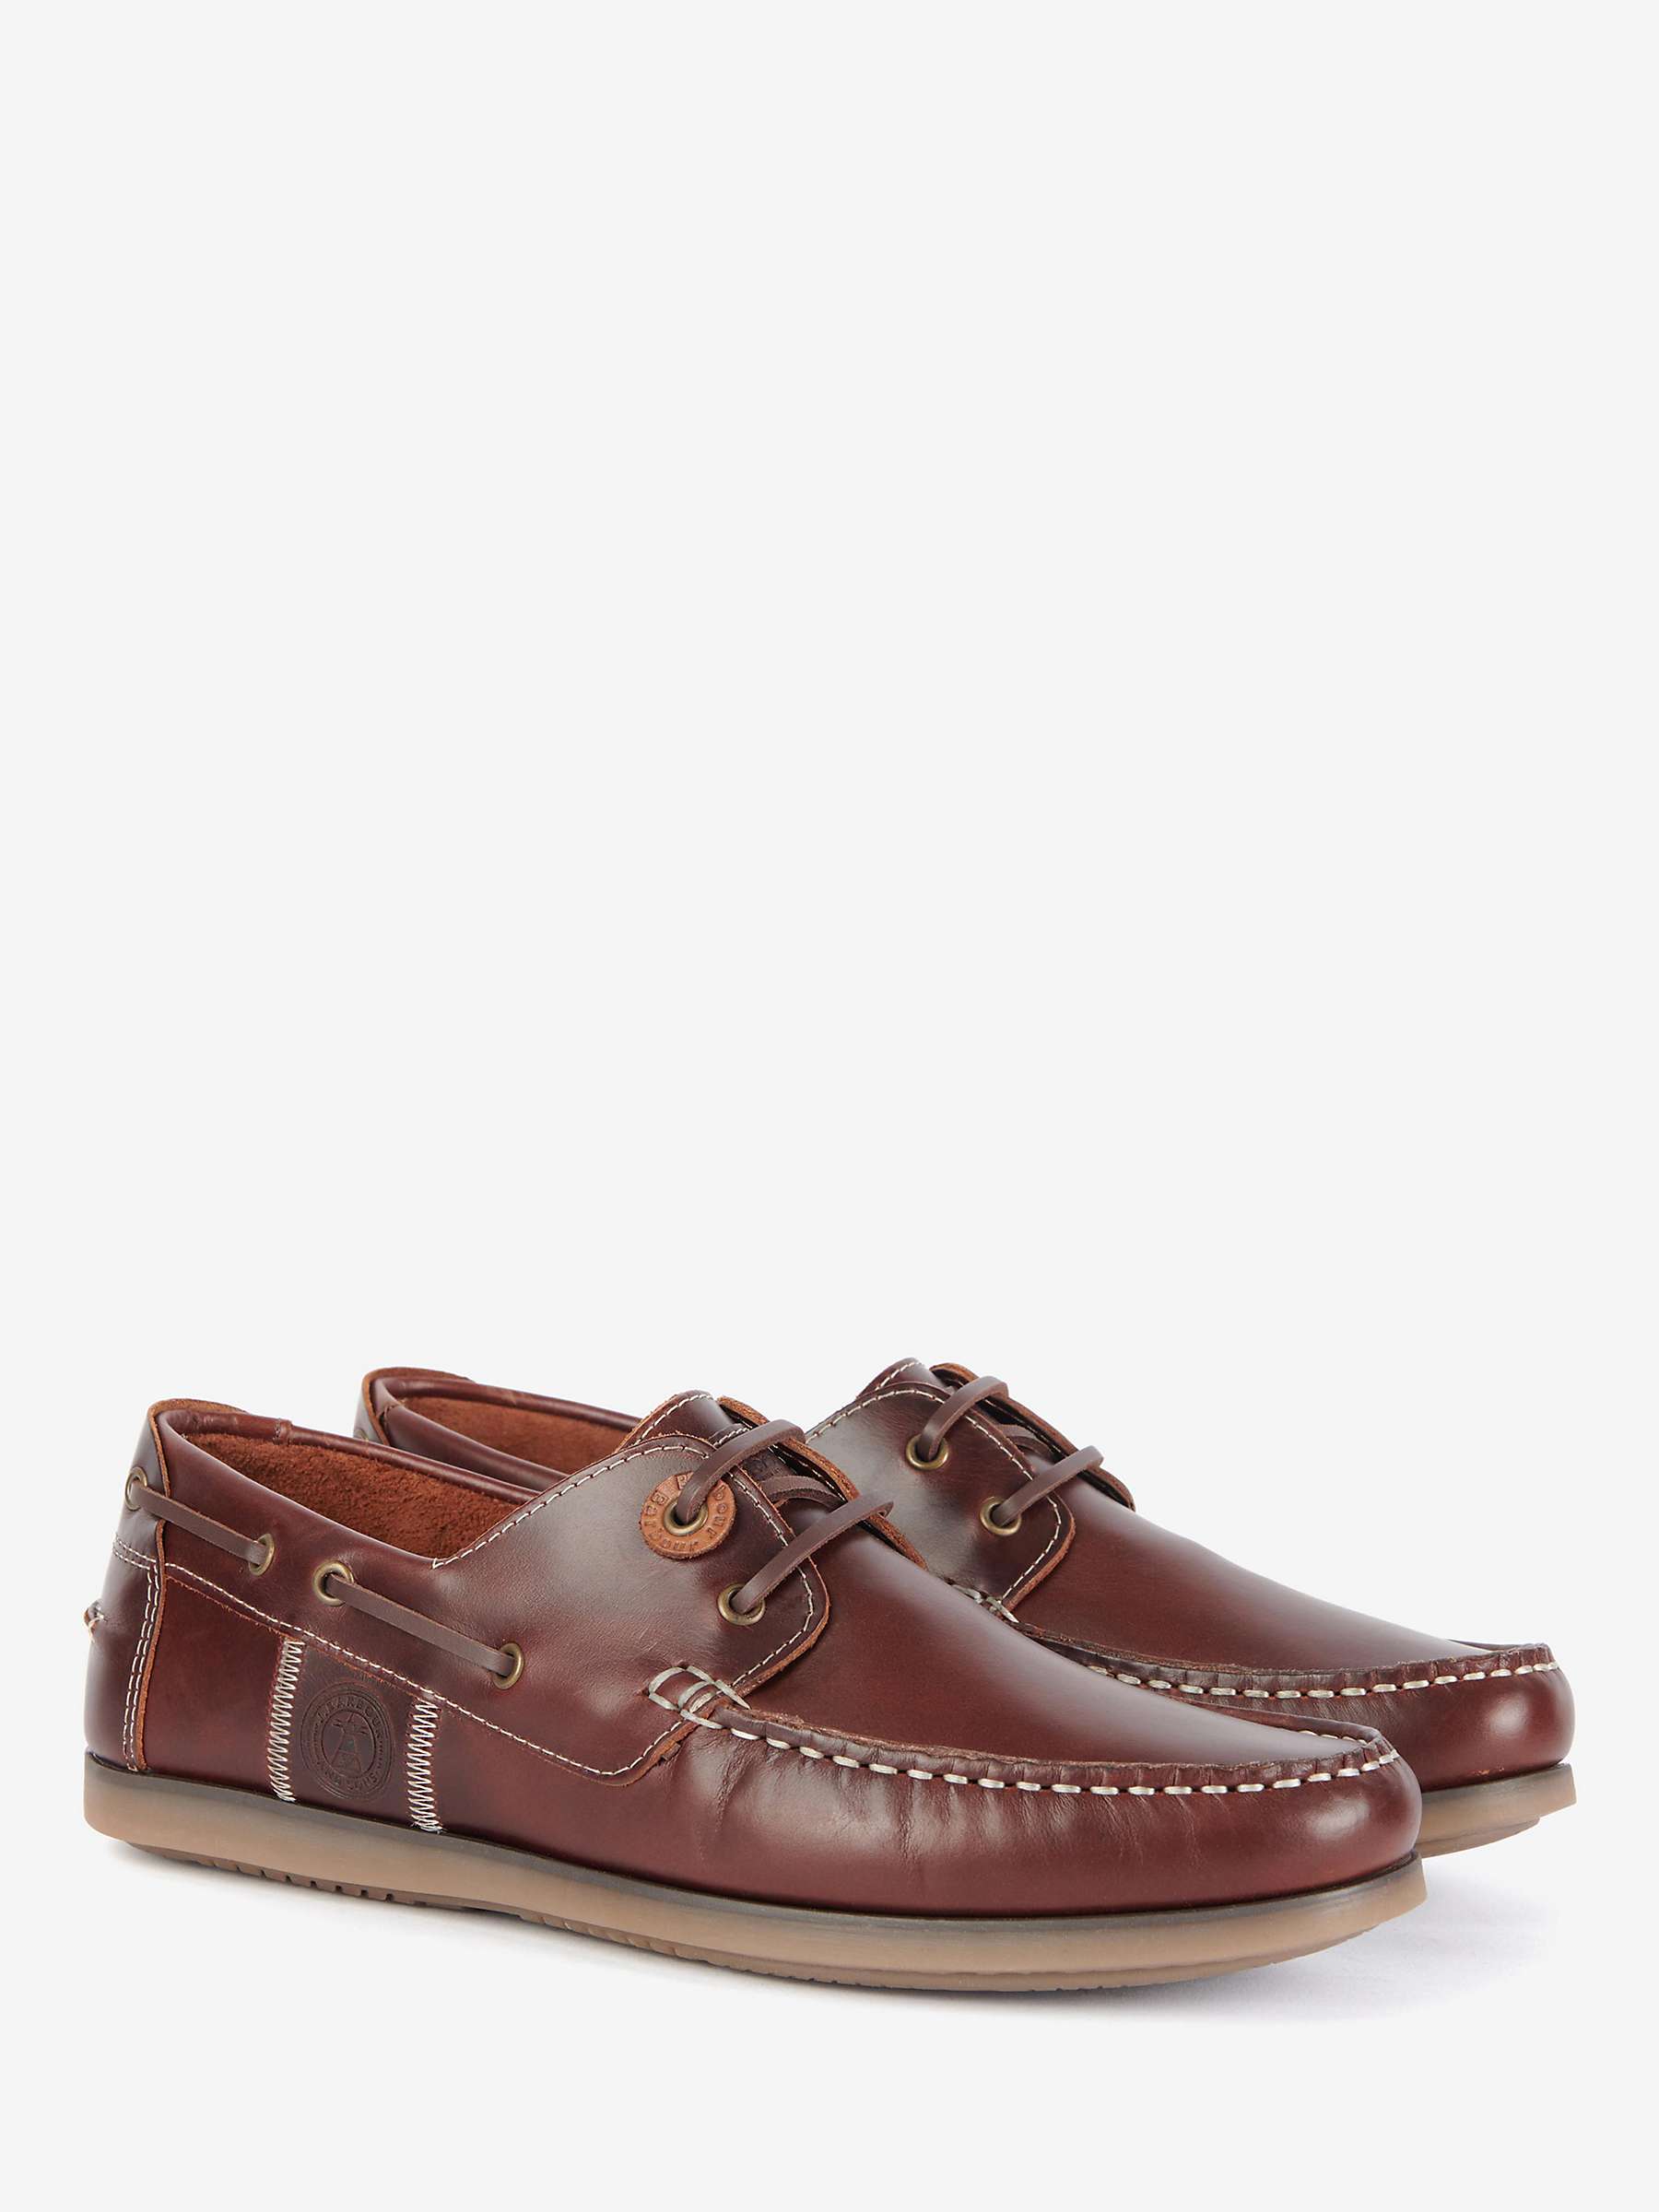 Buy Barbour Wake Leather Boat Shoes Online at johnlewis.com